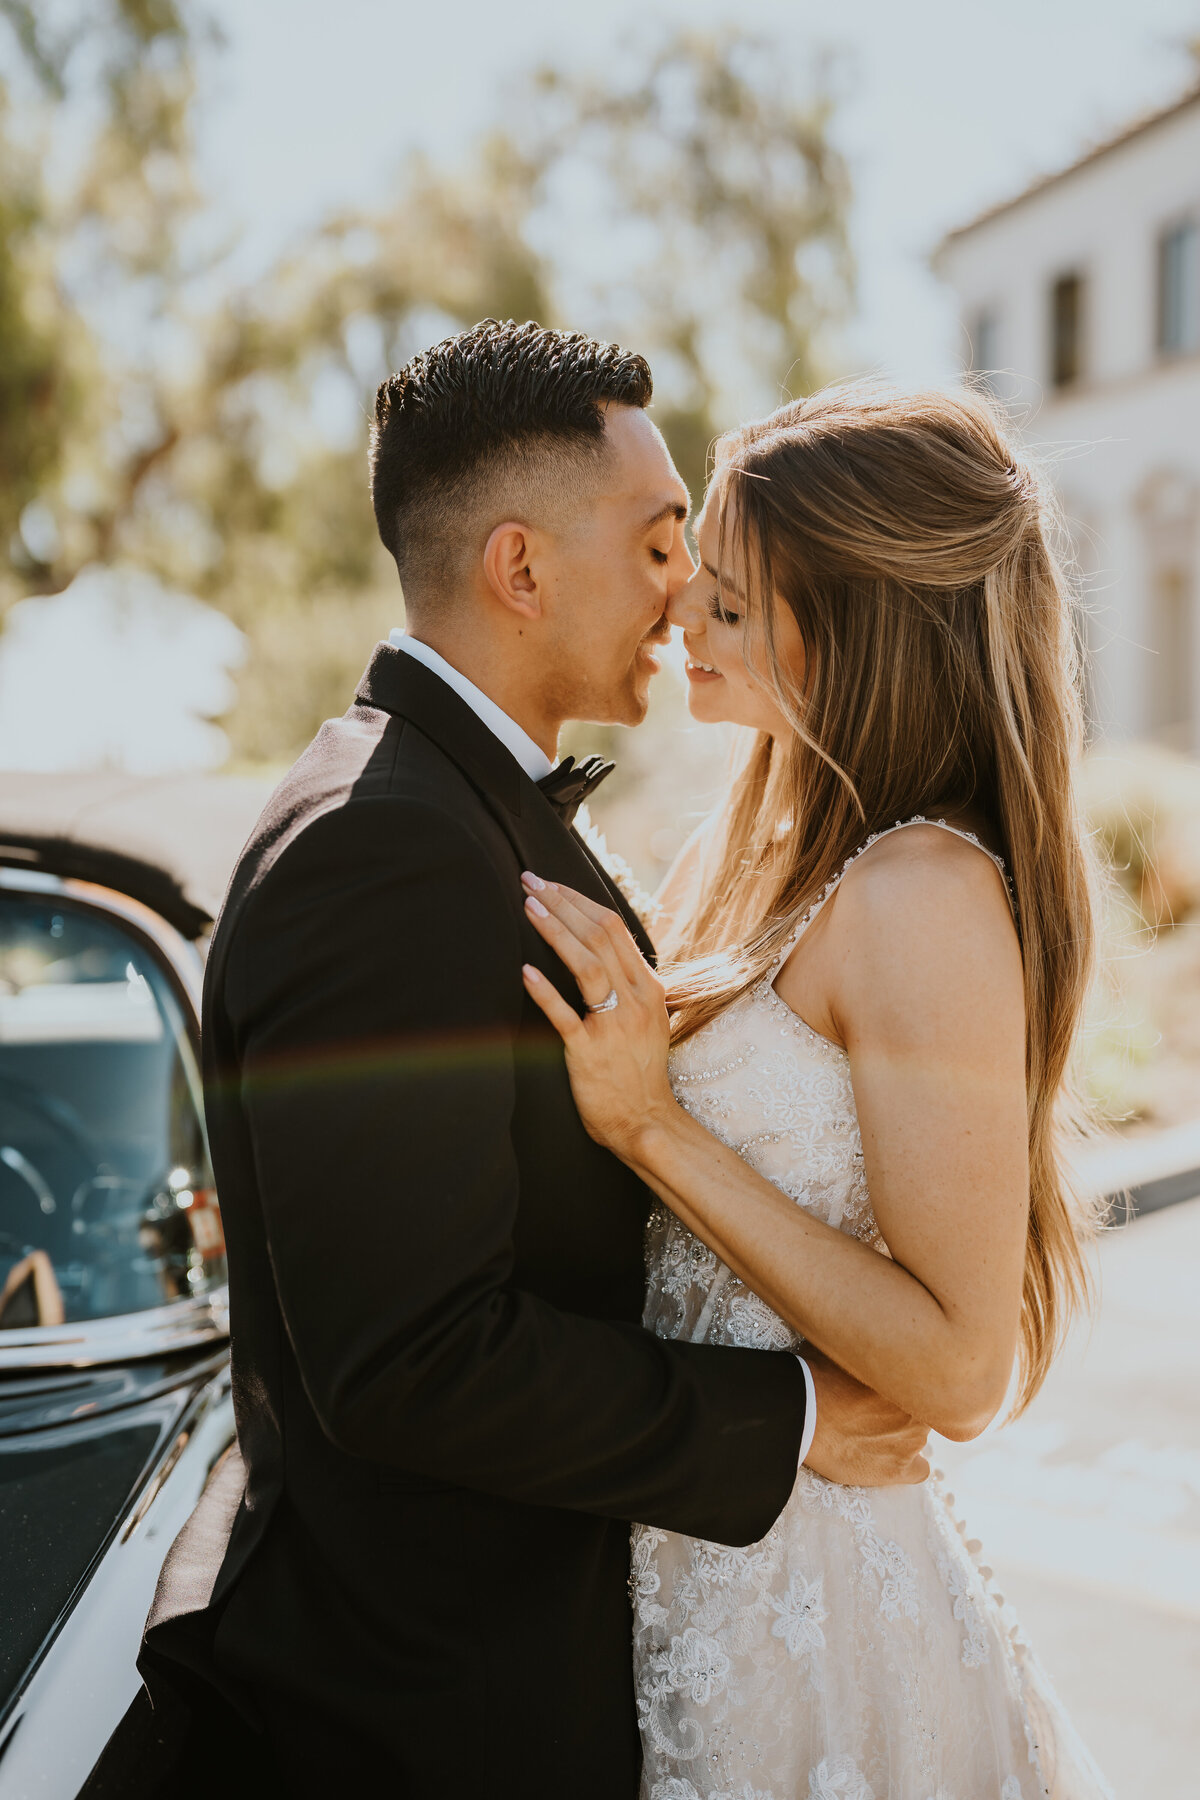 Groom and bride share a kiss